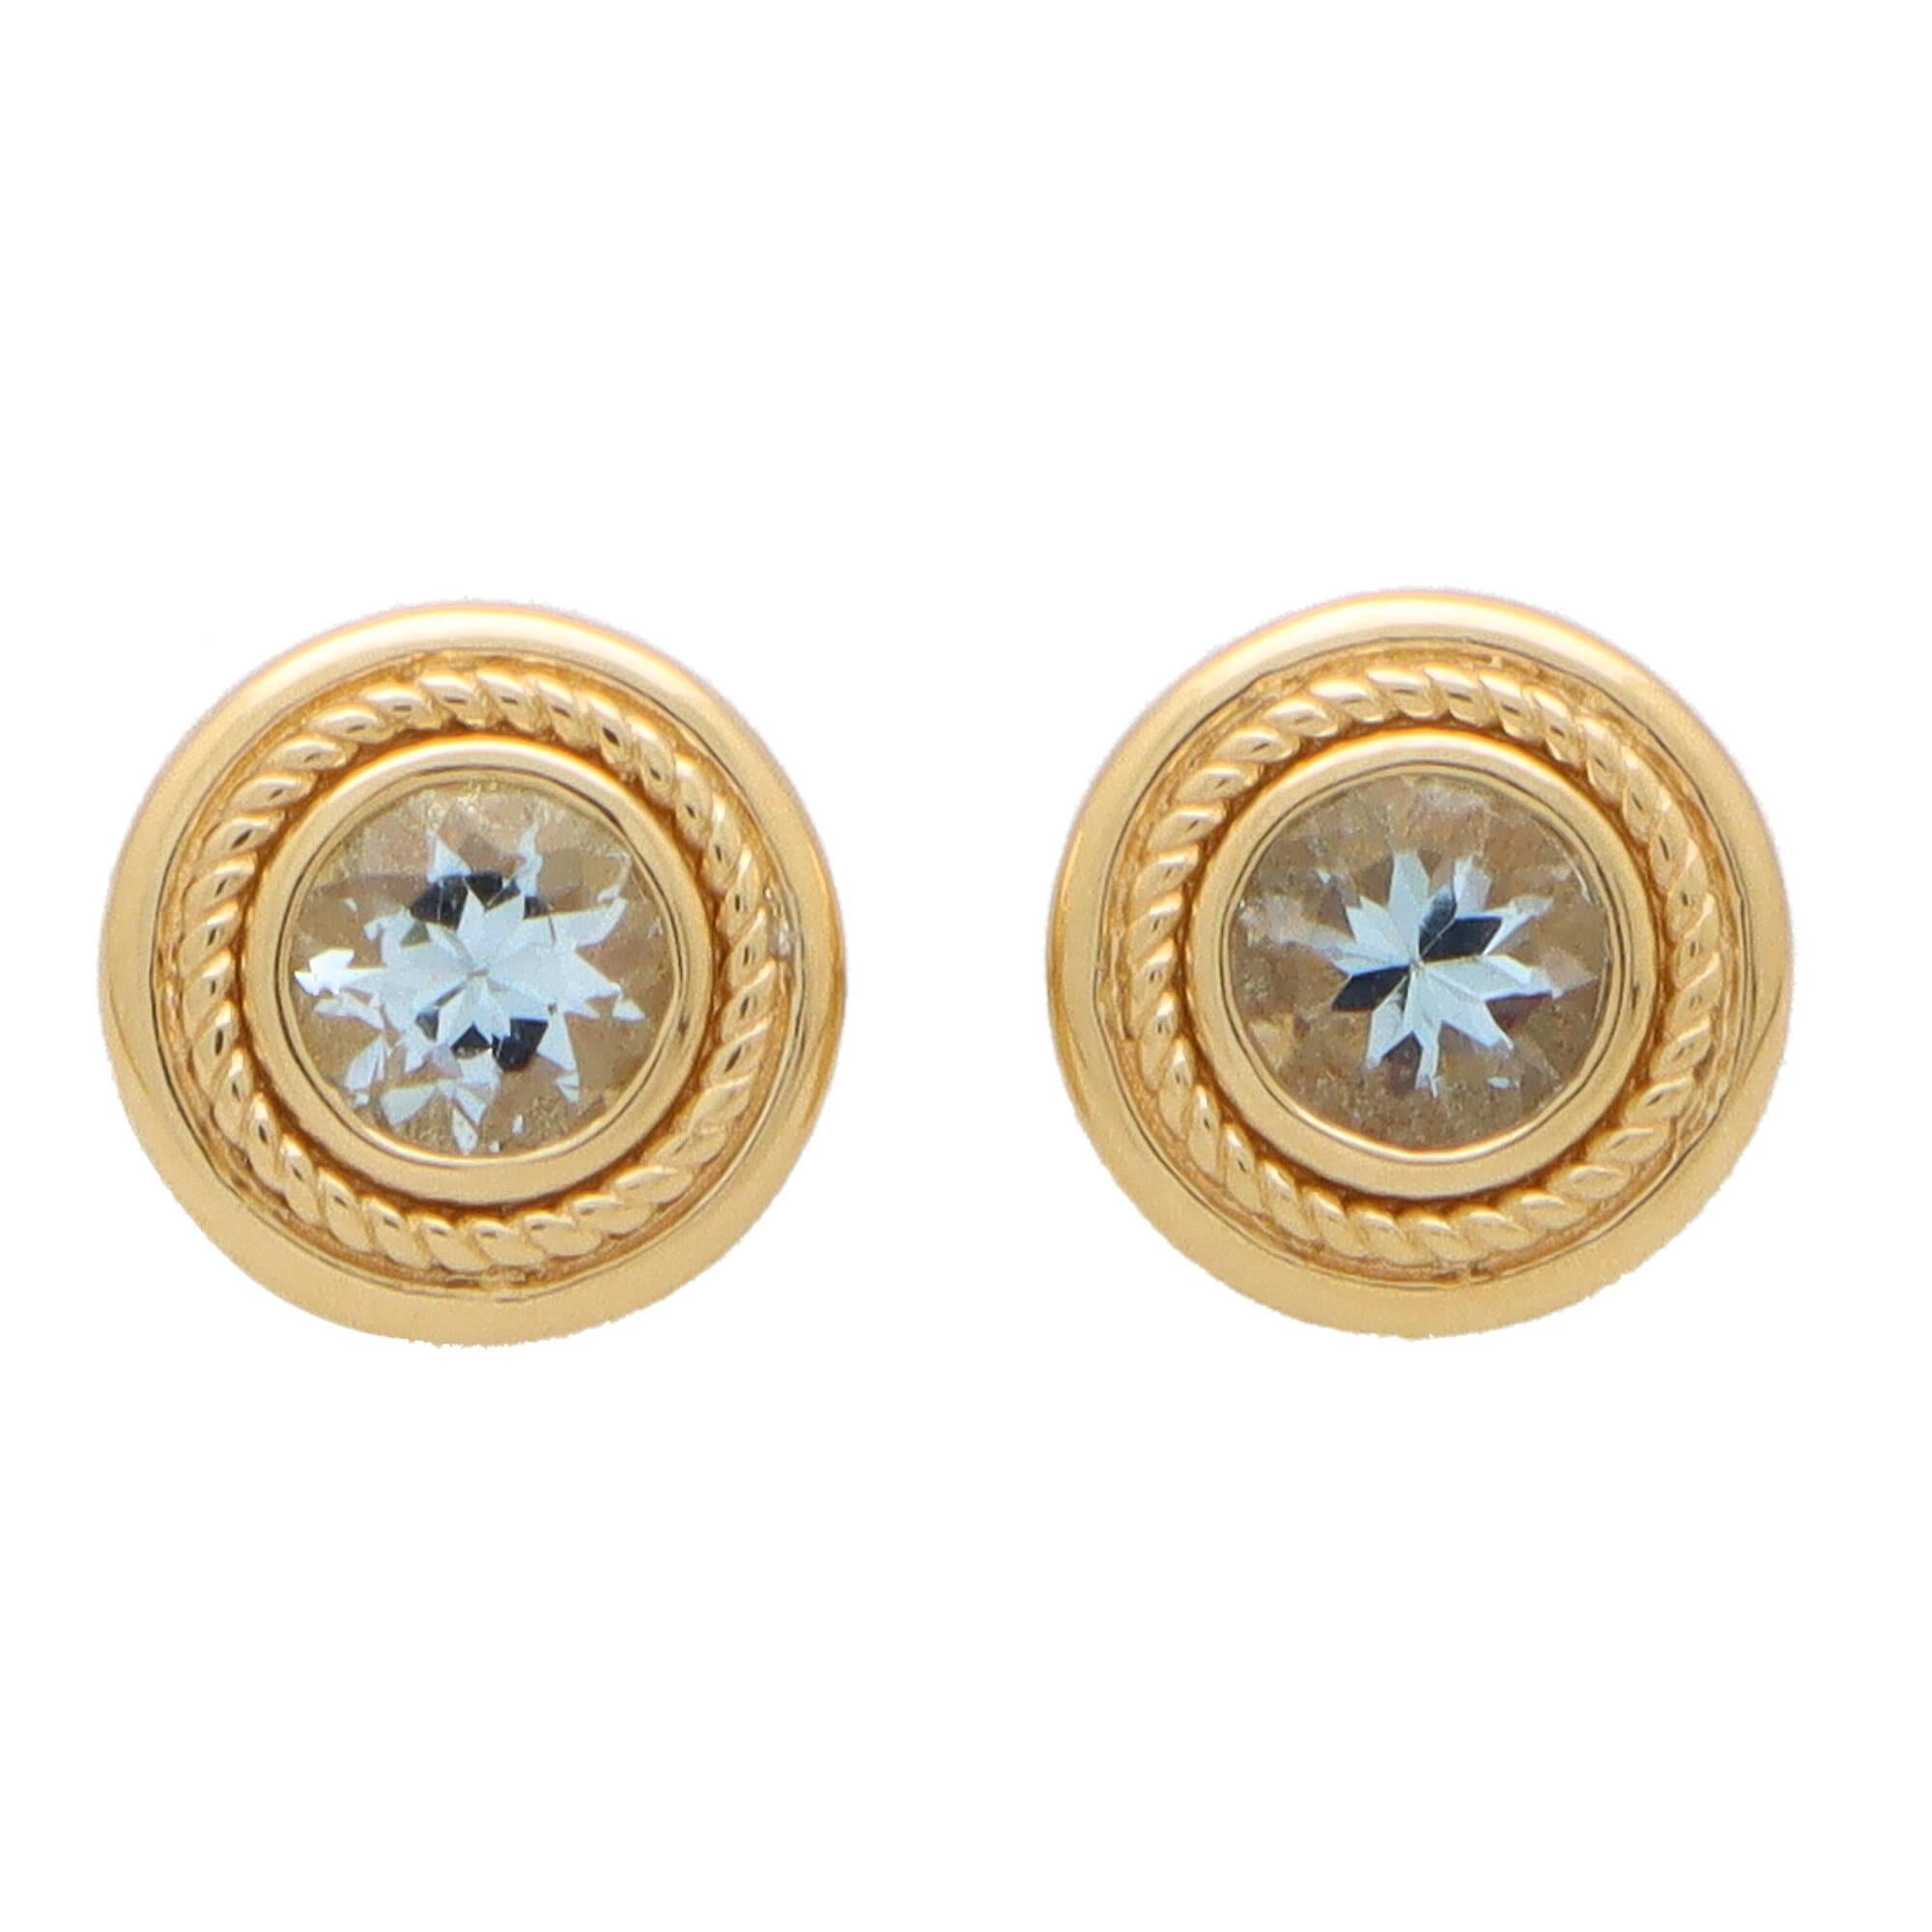 Etruscan Revival Aquamarine Etruscan Inspired Stud Earrings Set in 18k Yellow Gold For Sale